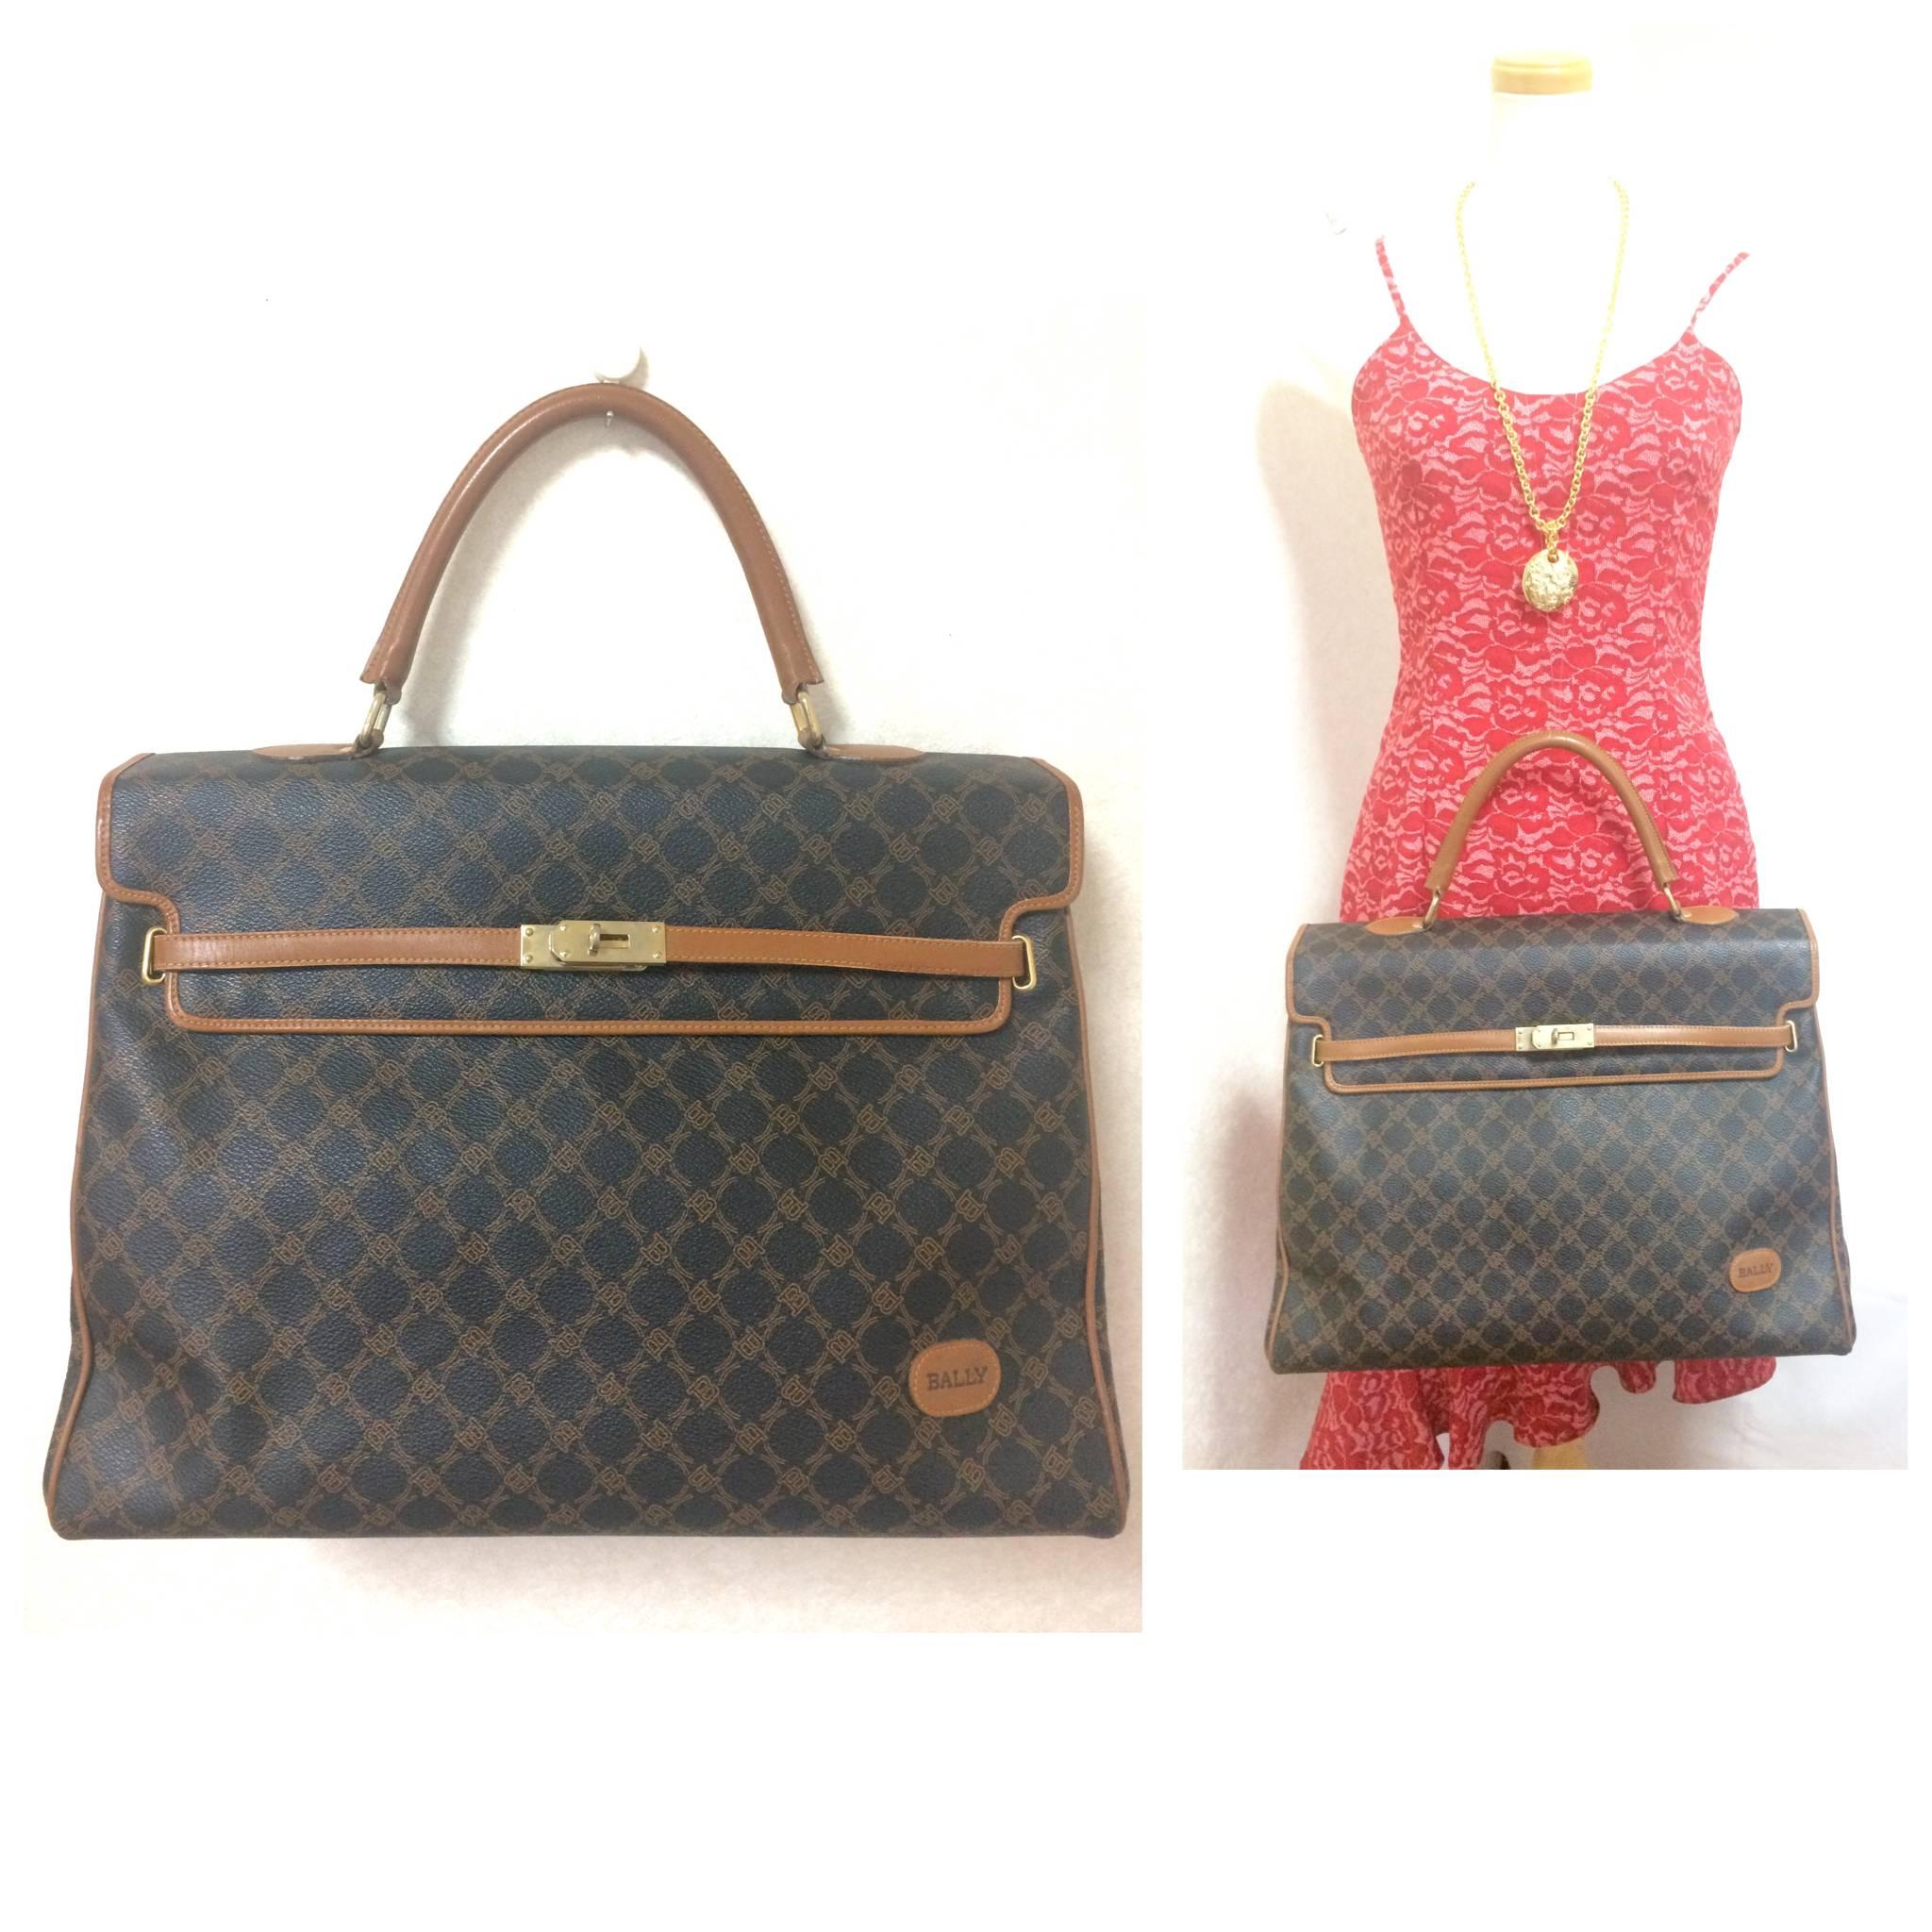 Vintage Bally large brown handbag in classic Kelly bag style with leather handle For Sale 2